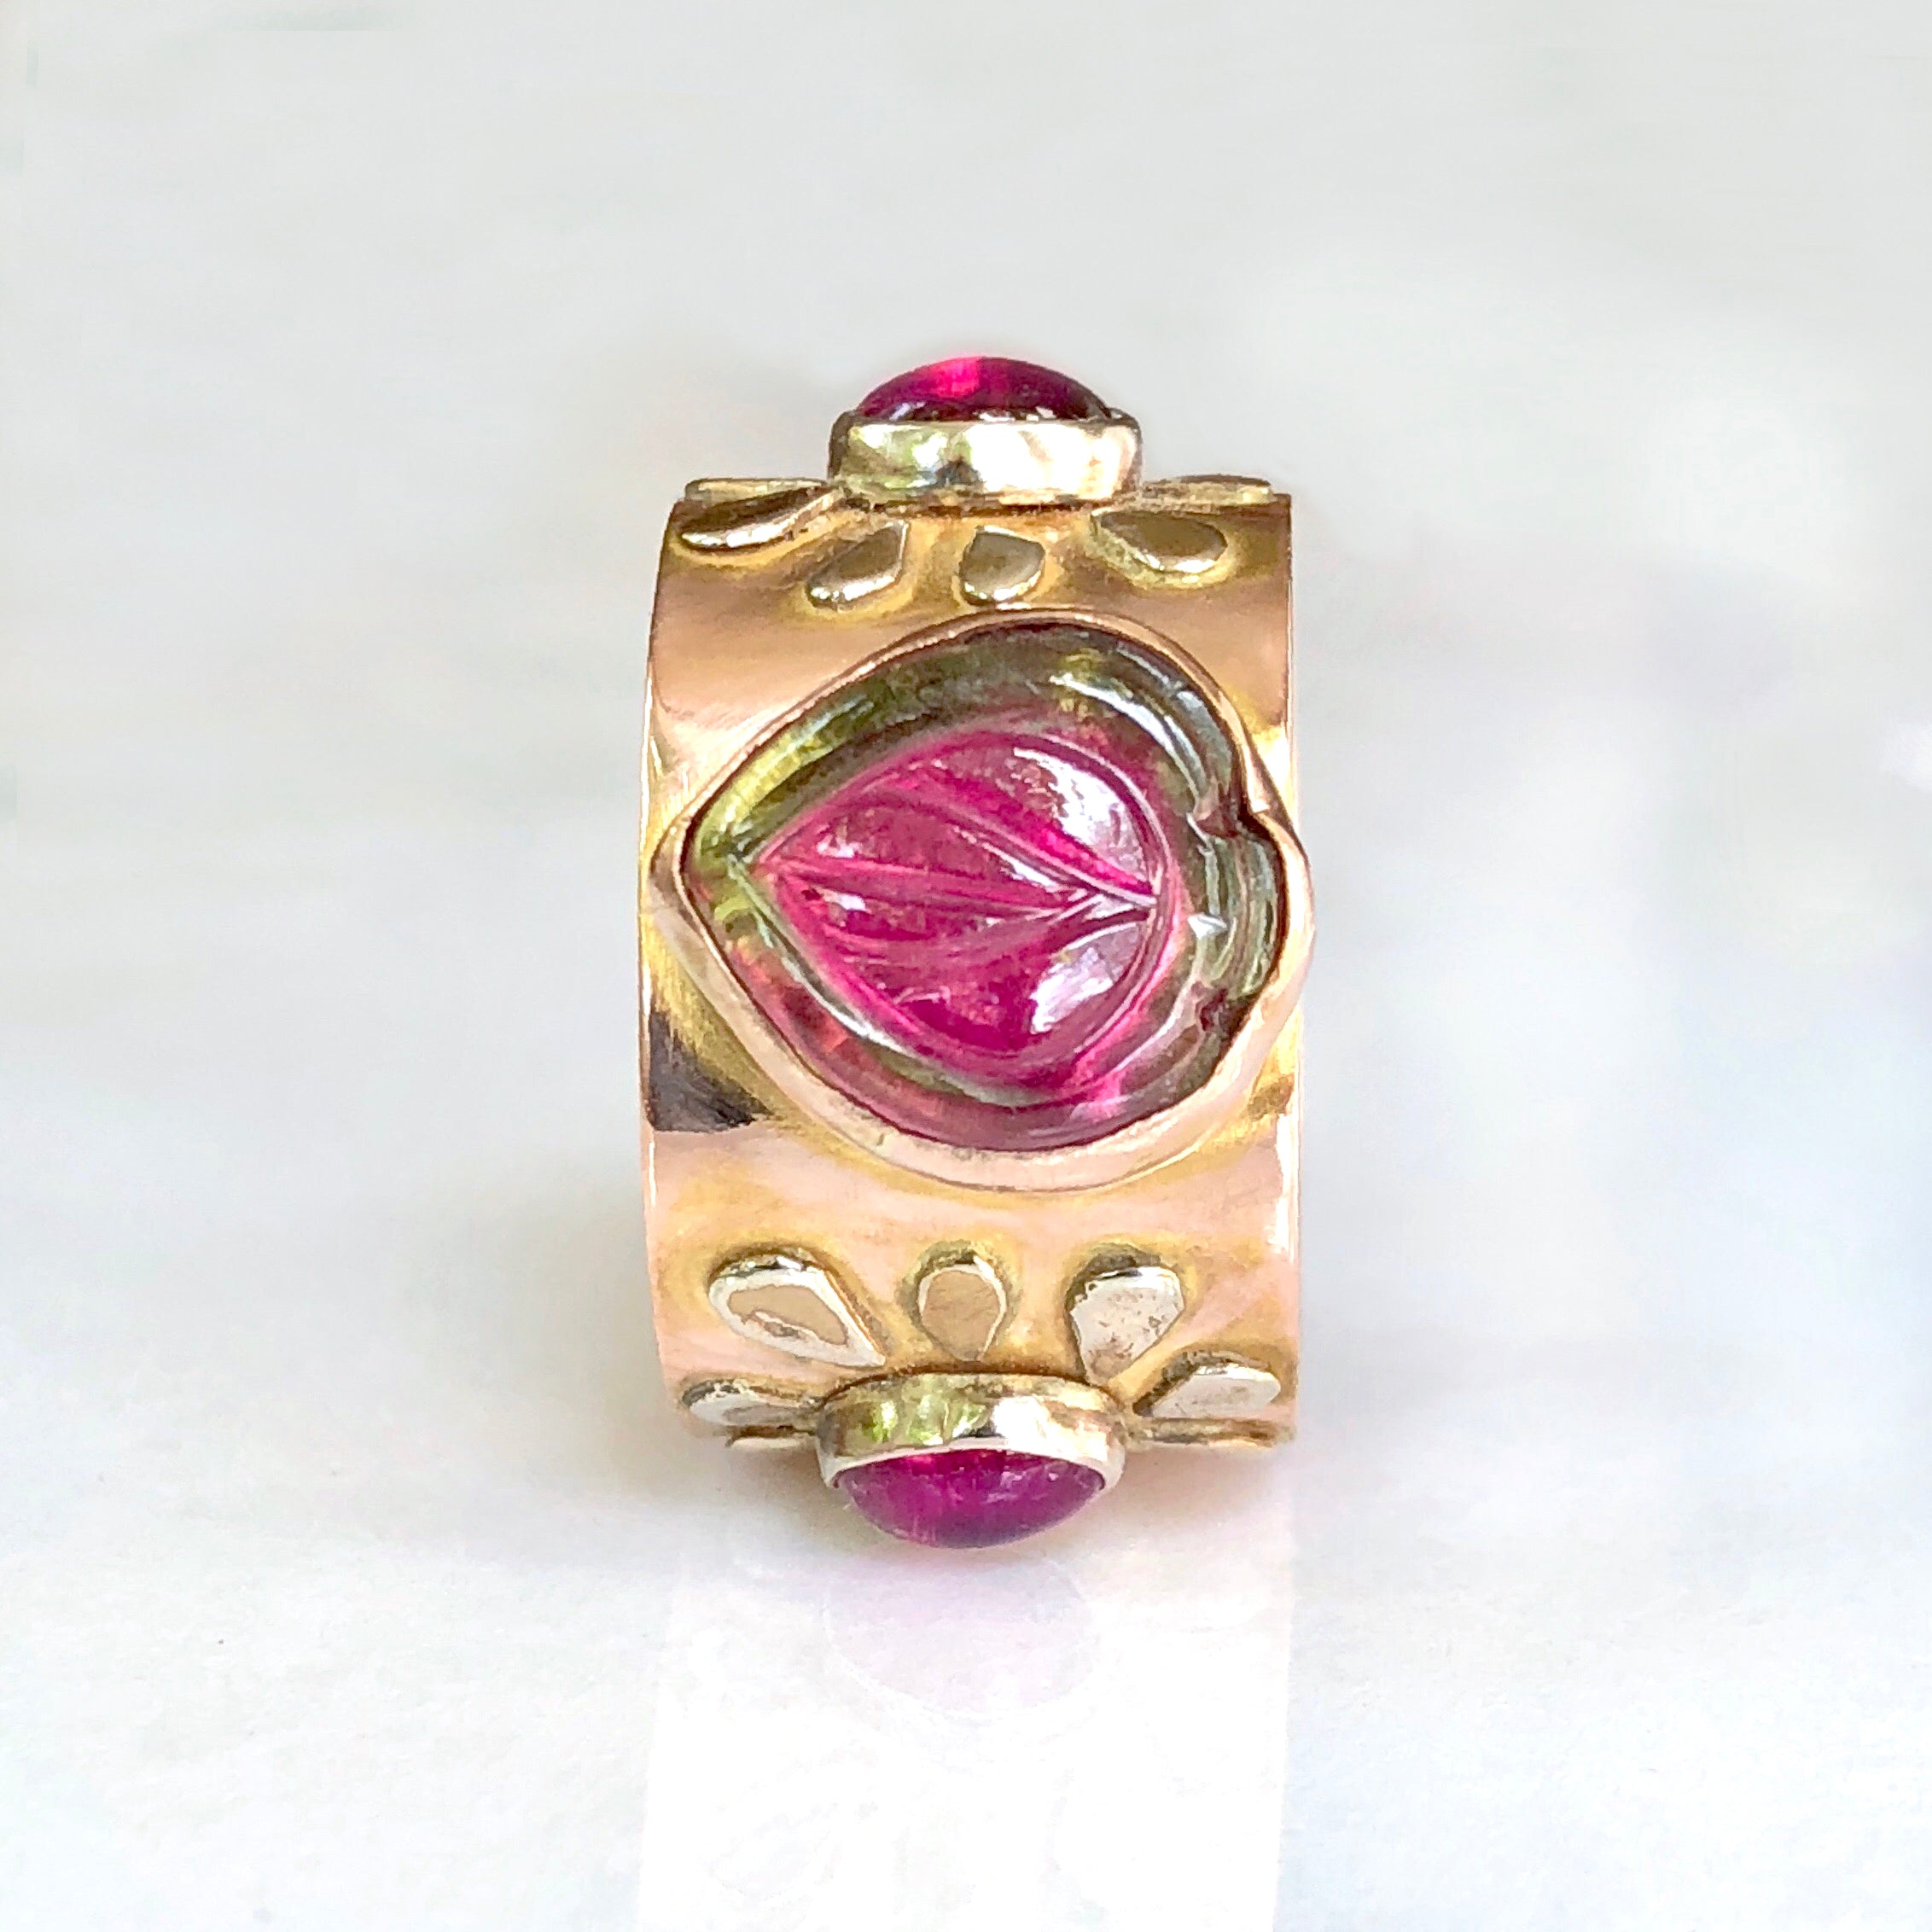 14K Watermelon Tourmaline Ring, Solid Rose Gold Wide Ring, One of a kind